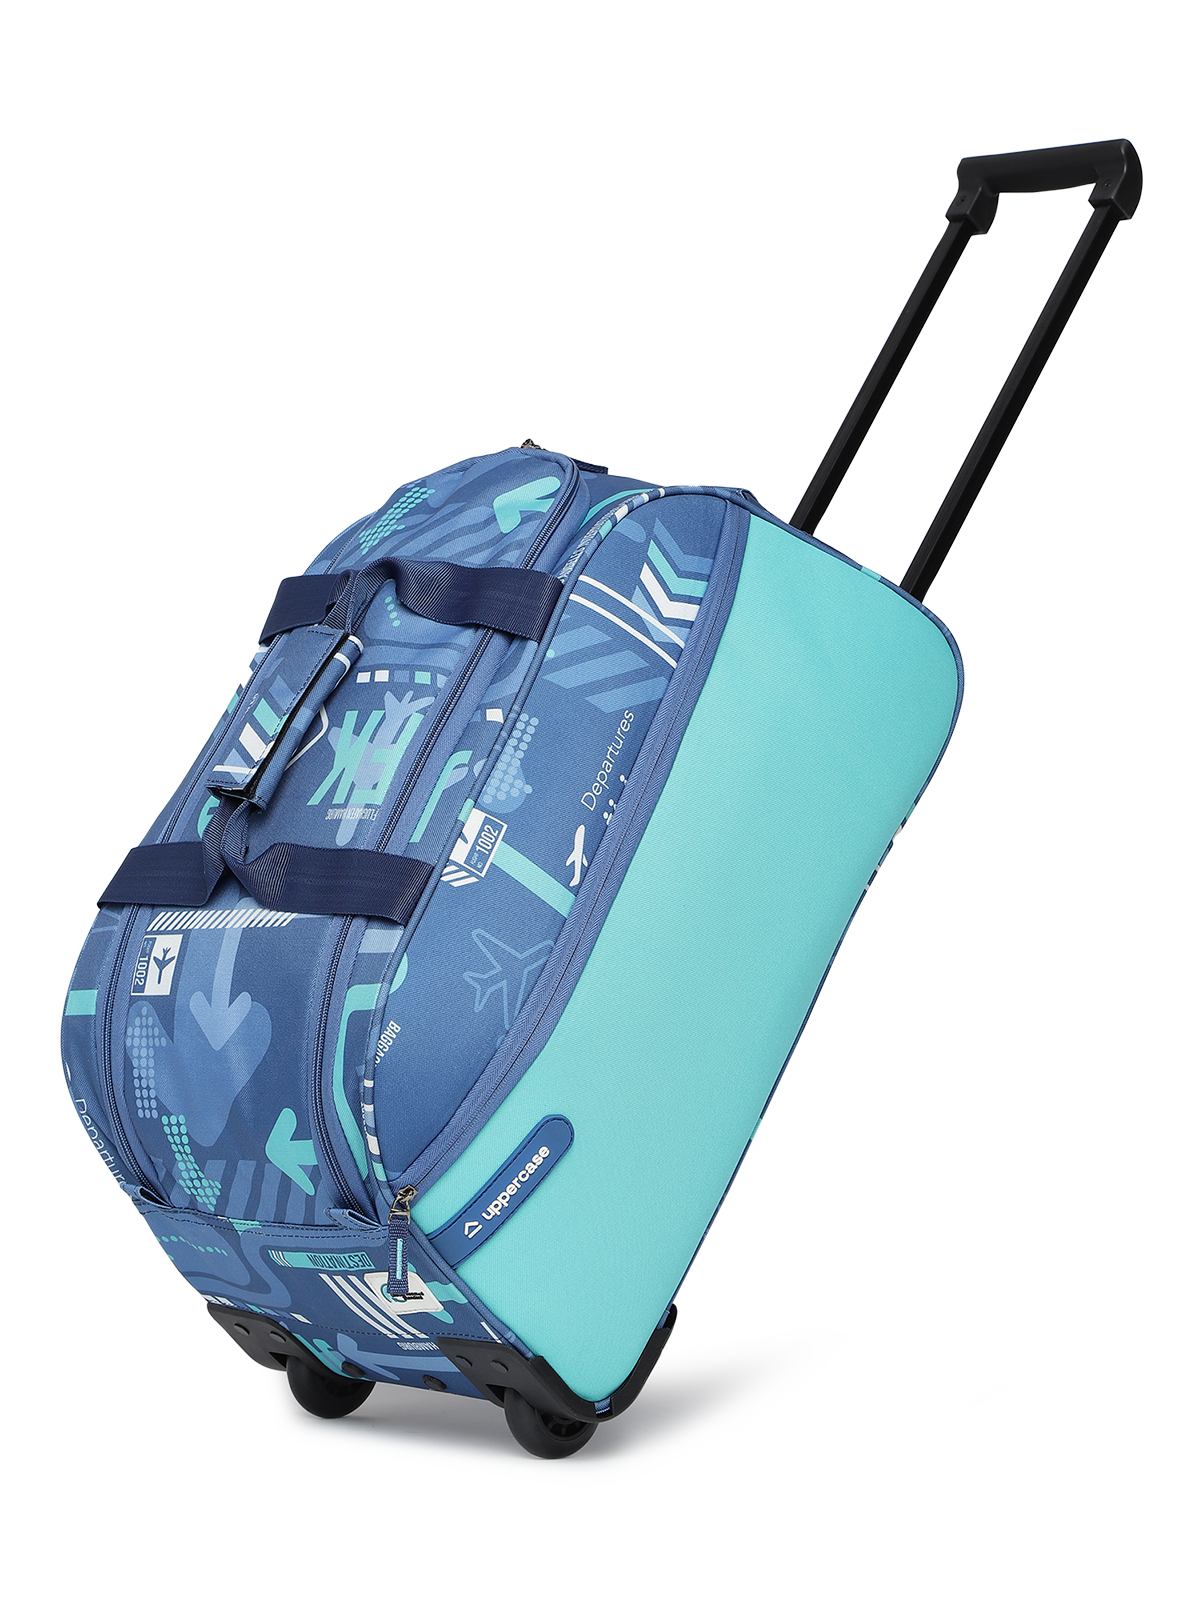 uppercase JFK 52 Duffle Trolley Bag | Dust Resistant Travel Bag | Spacious Main Compartment | Smooth Wheels | Quick Front Pocket Access | Duffle Bag for Women & Men | 1500 Days Warranty (Denim Blue)